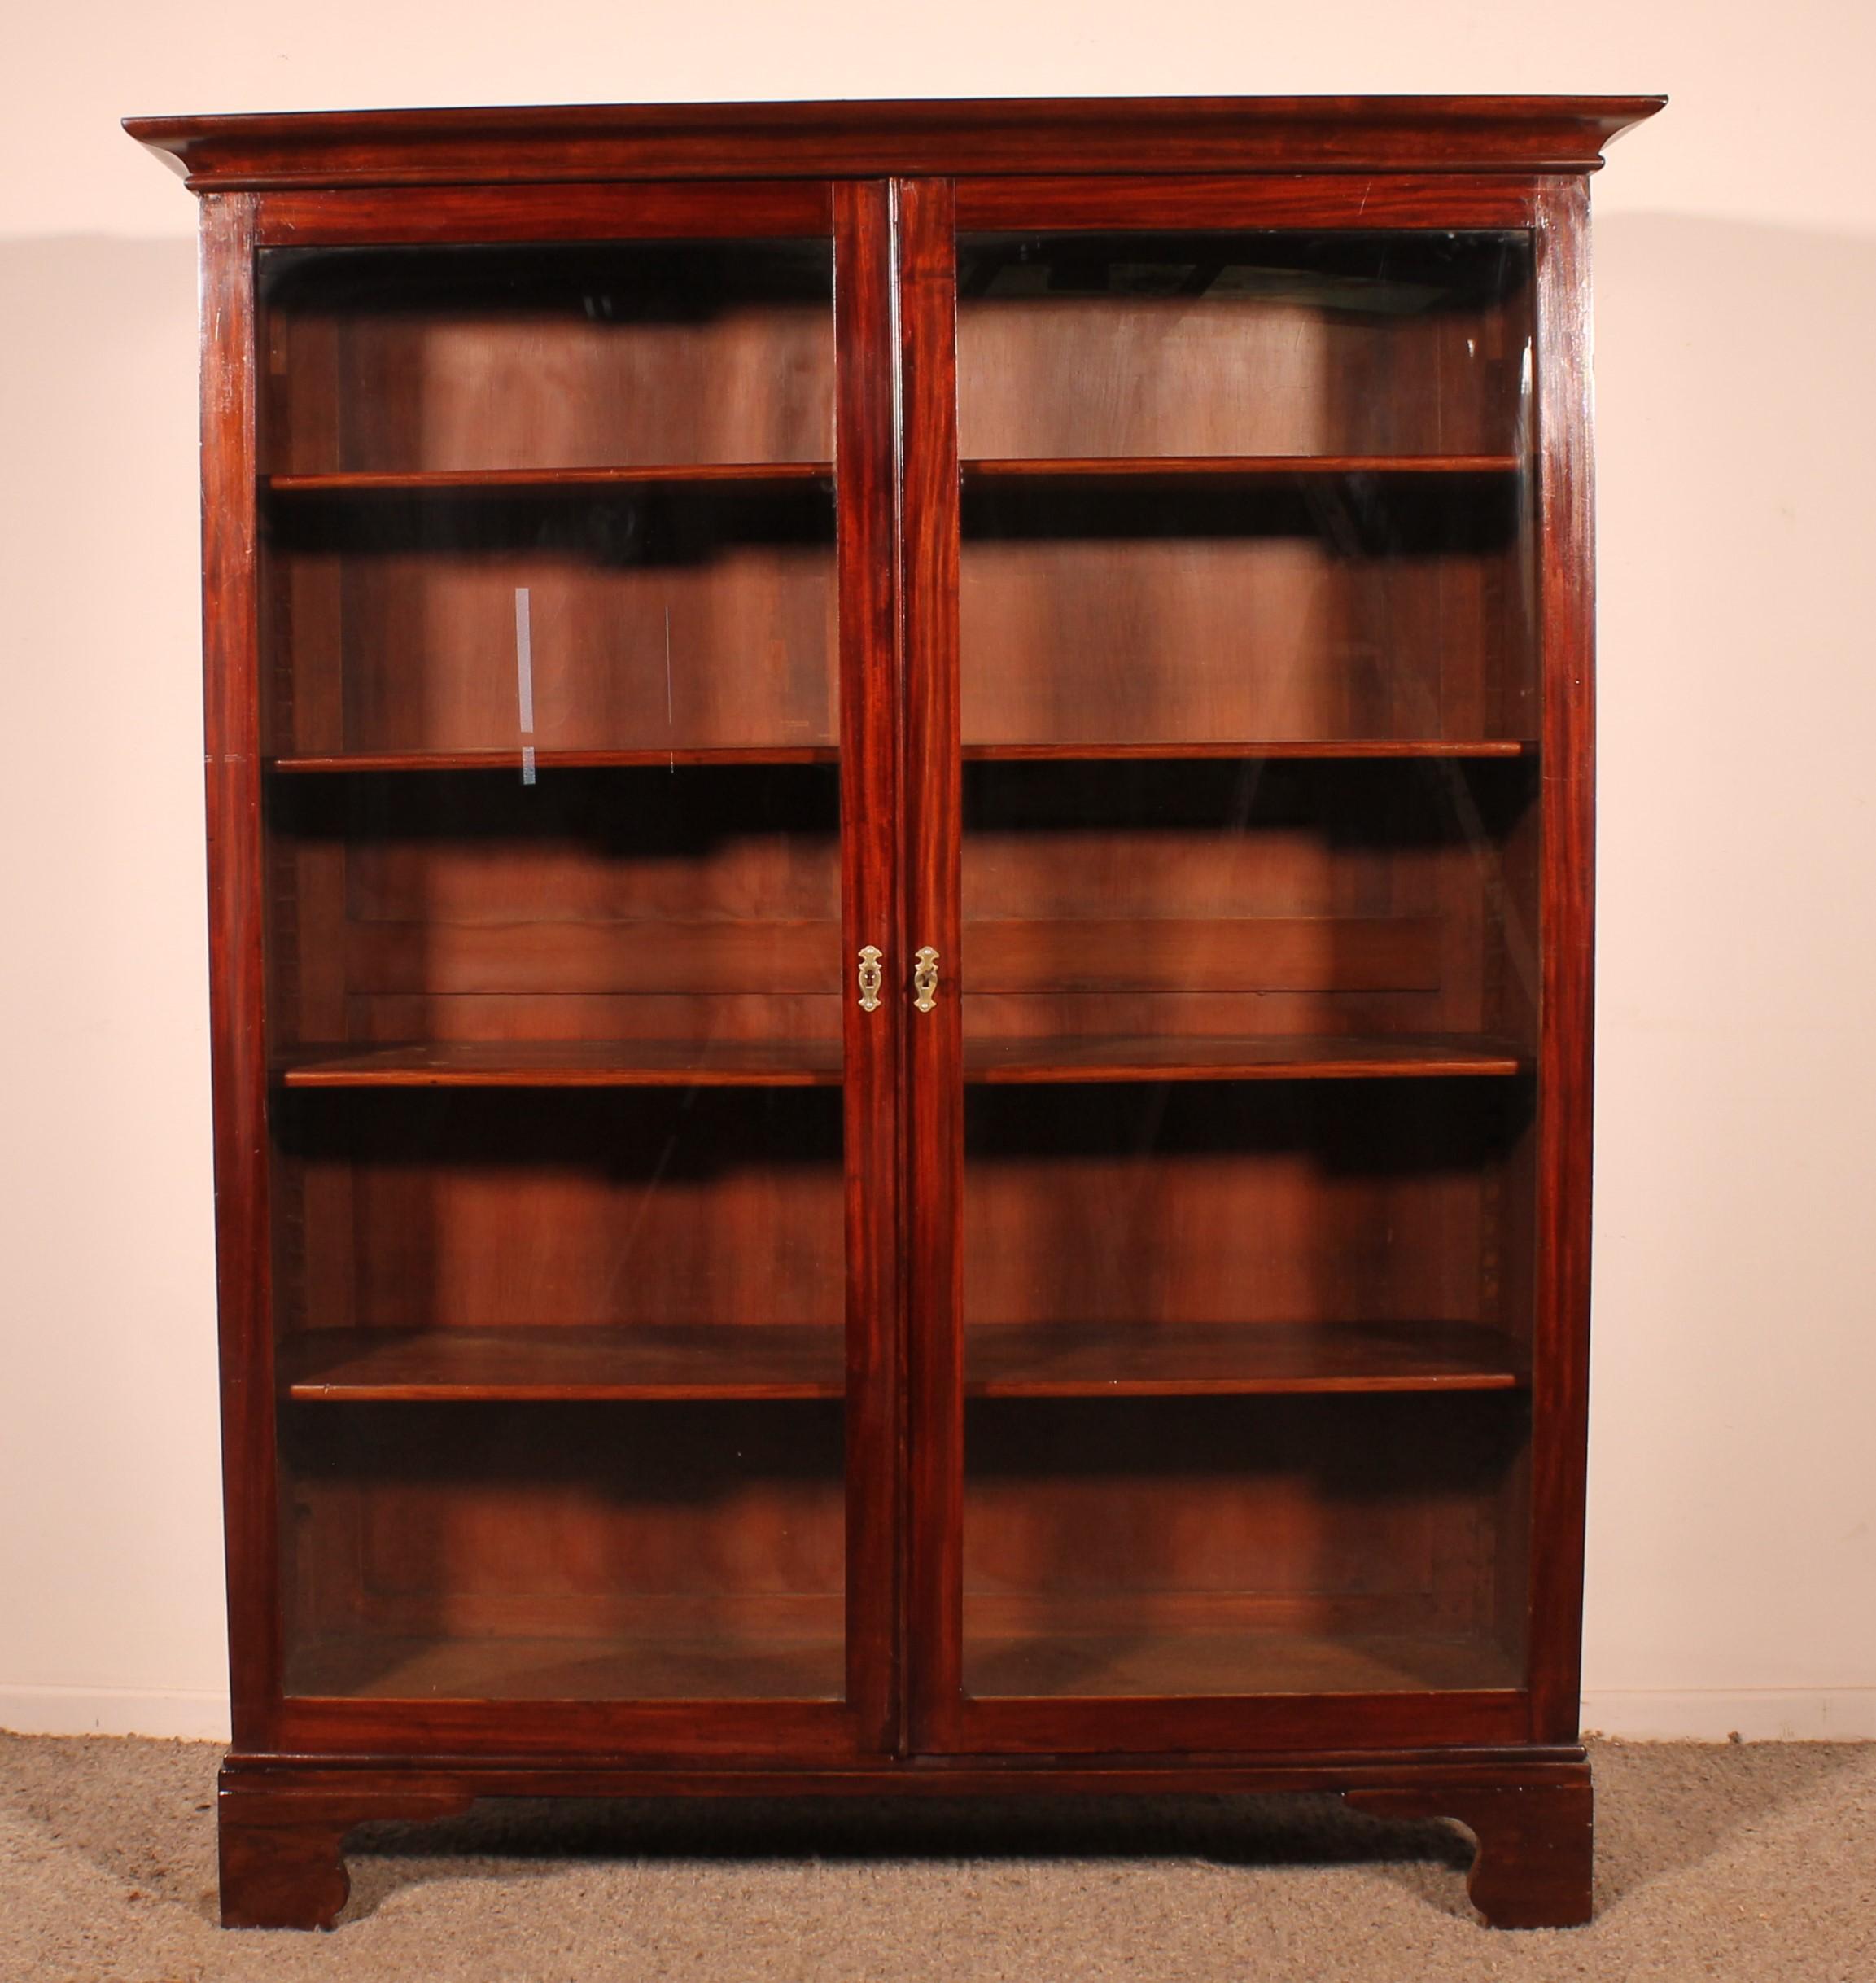 Elegant 19th century mahogany glazed bookcase
Bookcase of very good quality which has its original windows
Beautiful proportions
It can also be used as a display cabinet
The bookcase has adjustable shelves
Original shelves with a mahogany